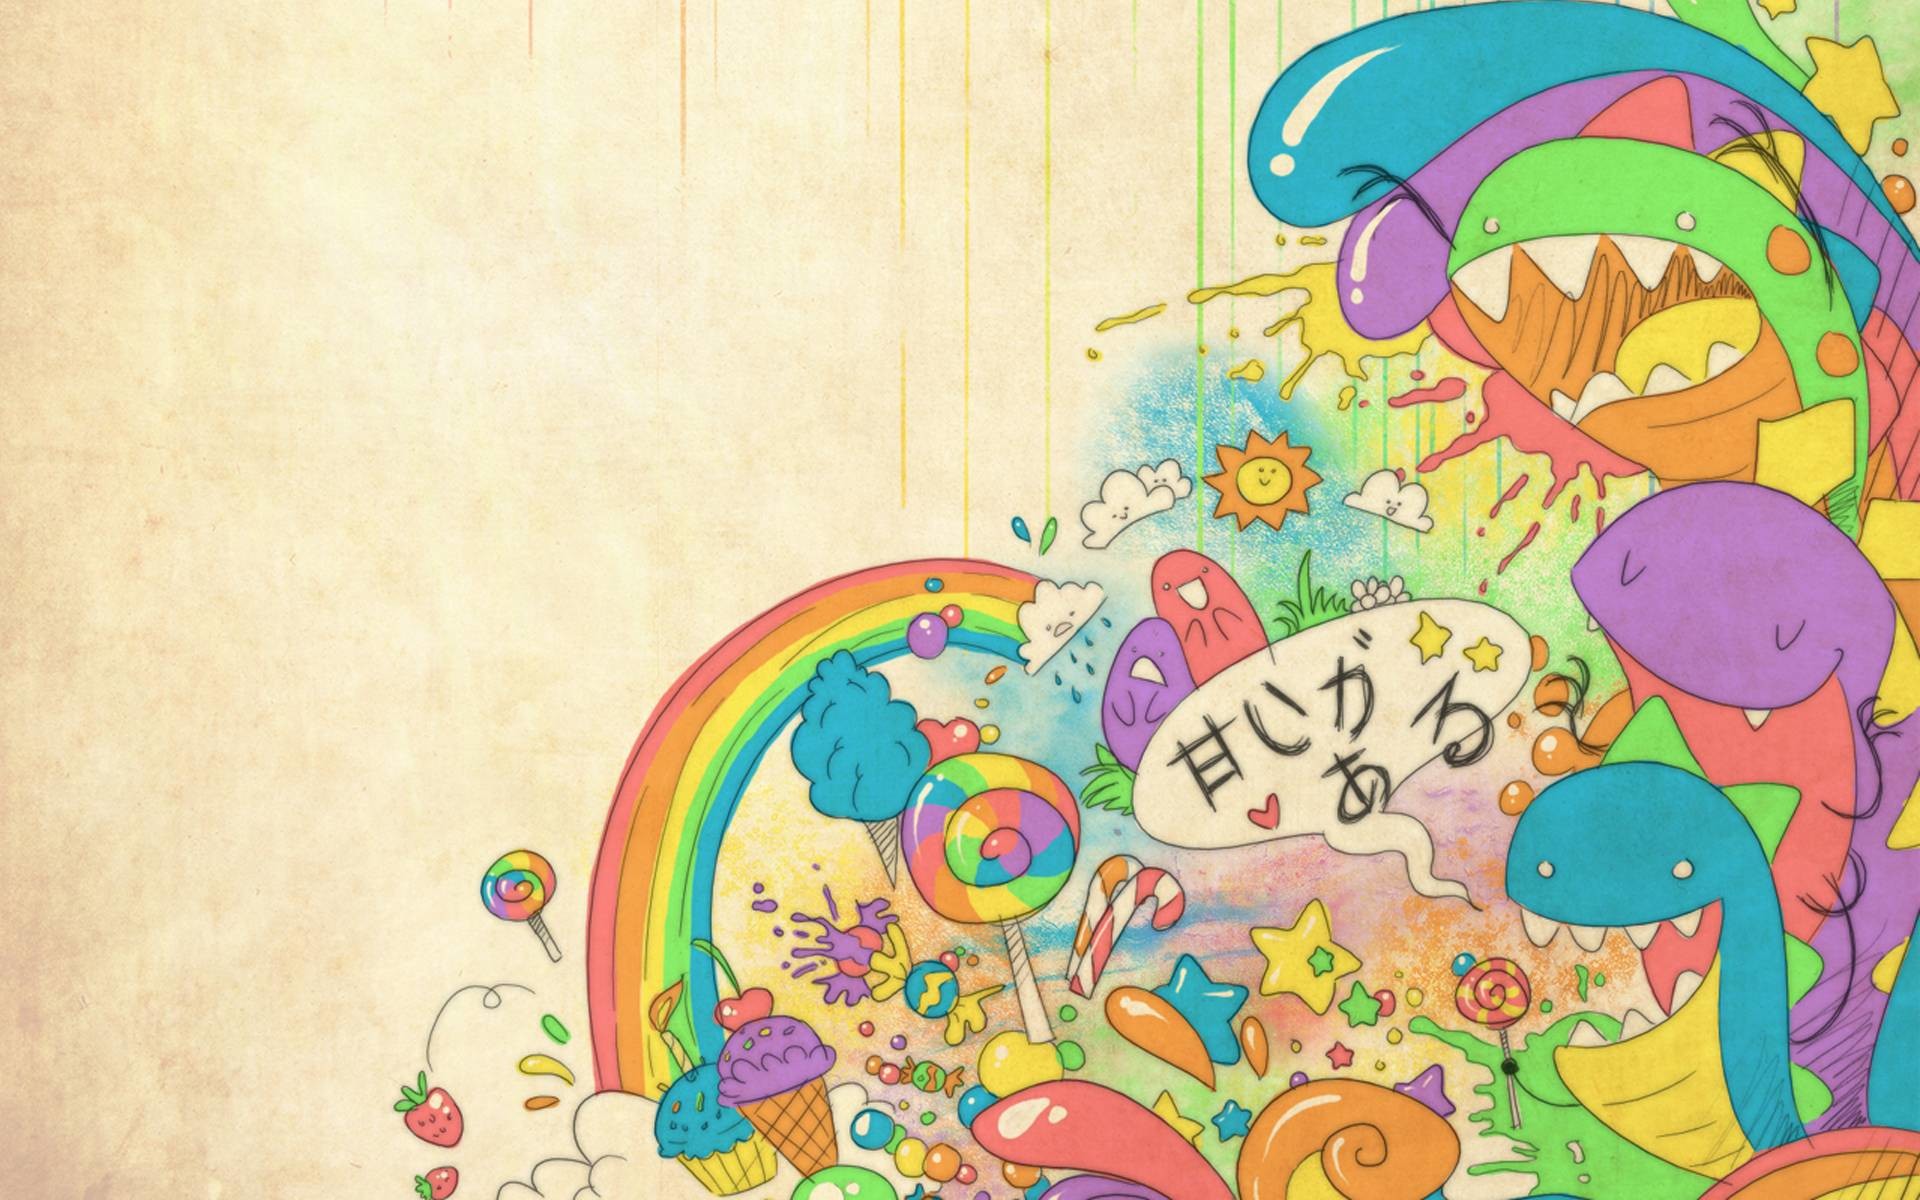 1920x1200 Candy Wallpaper High Quality Candy Wallpapers Full HD Candy Â· Kawaii  BackgroundTwitter BackgroundsCute ...